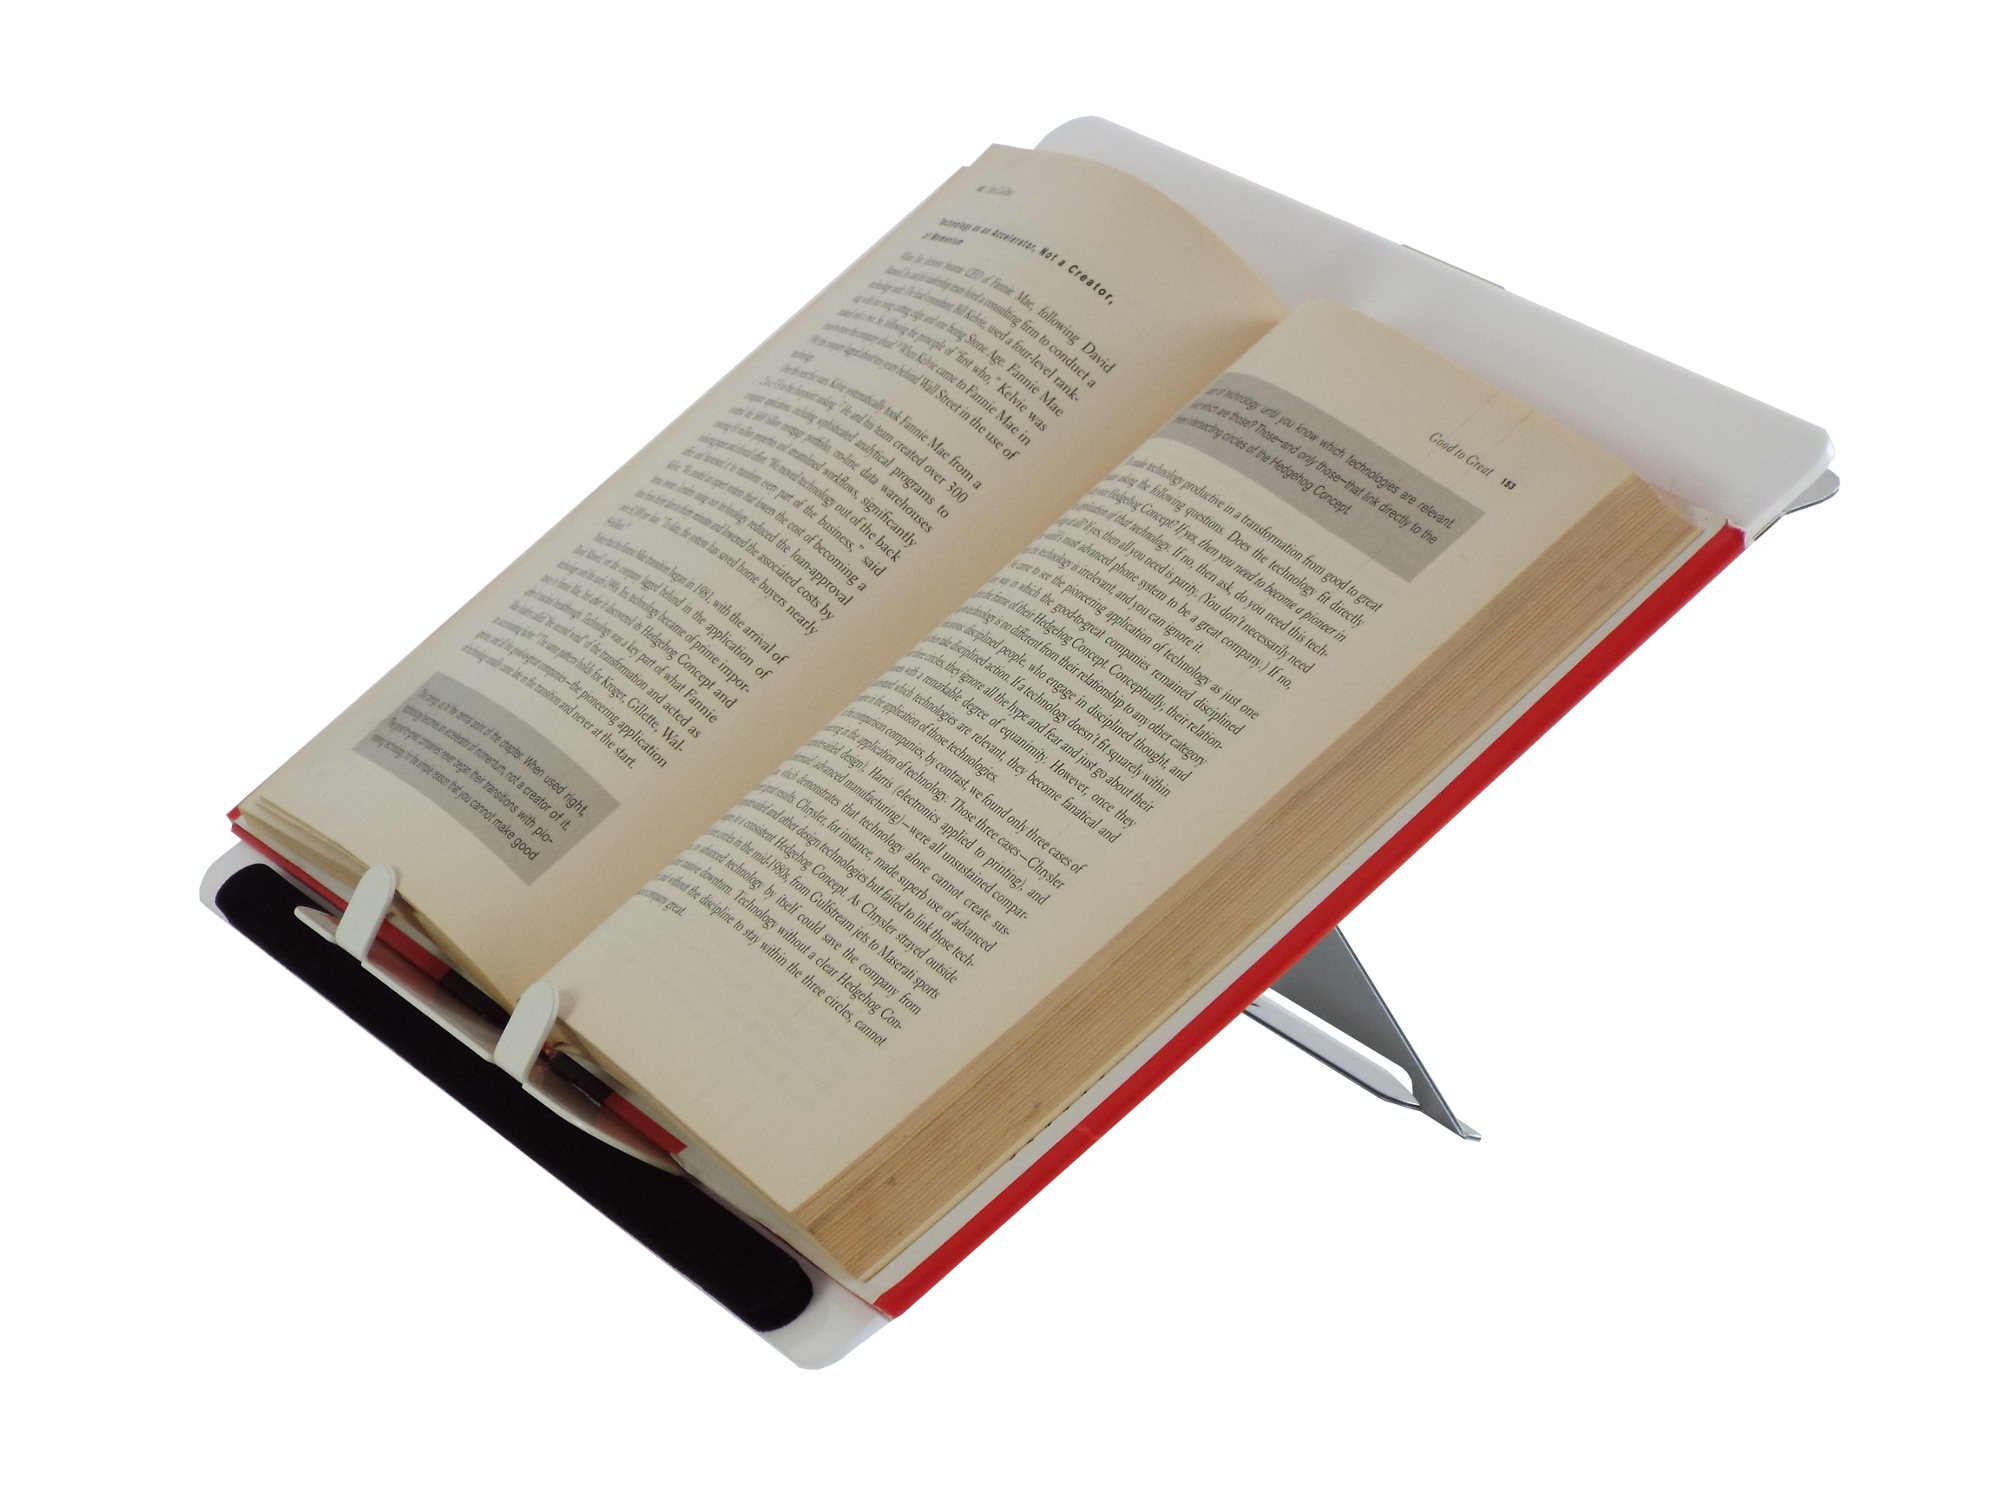  Add a book holder attachment to support books 